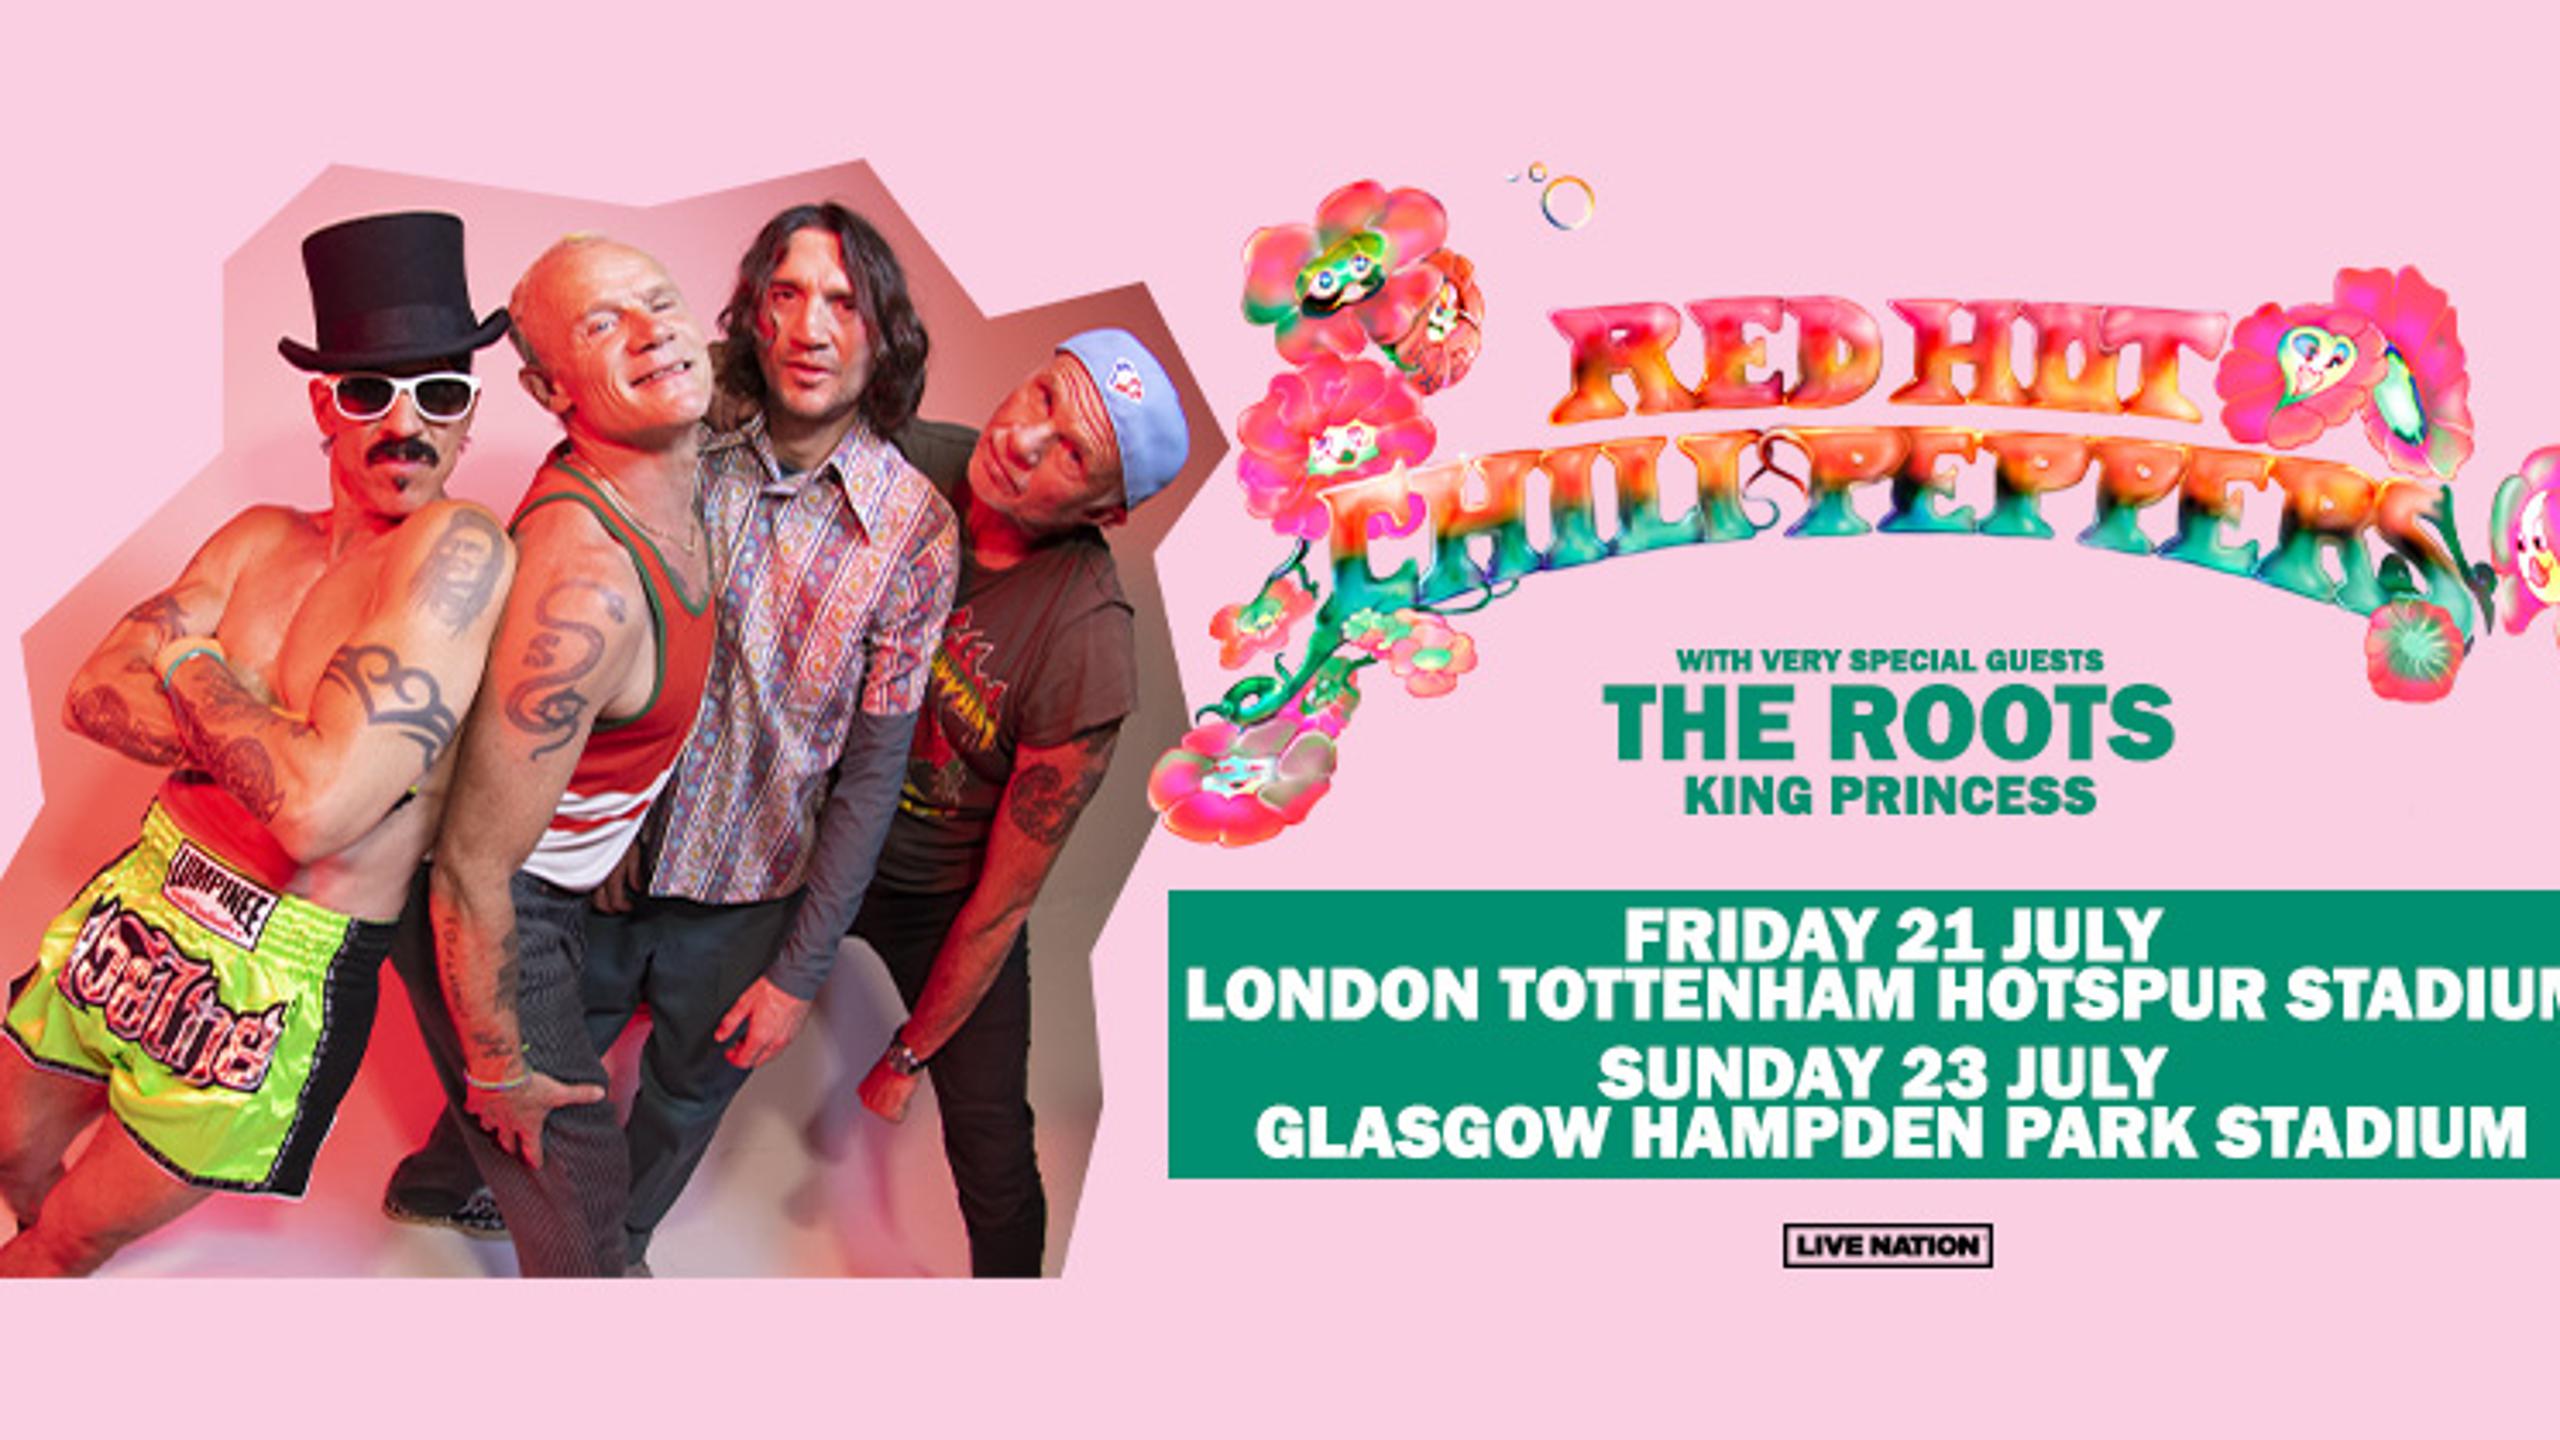 Red Hot Chili Peppers concert tickets for National Stadium Hampden Park